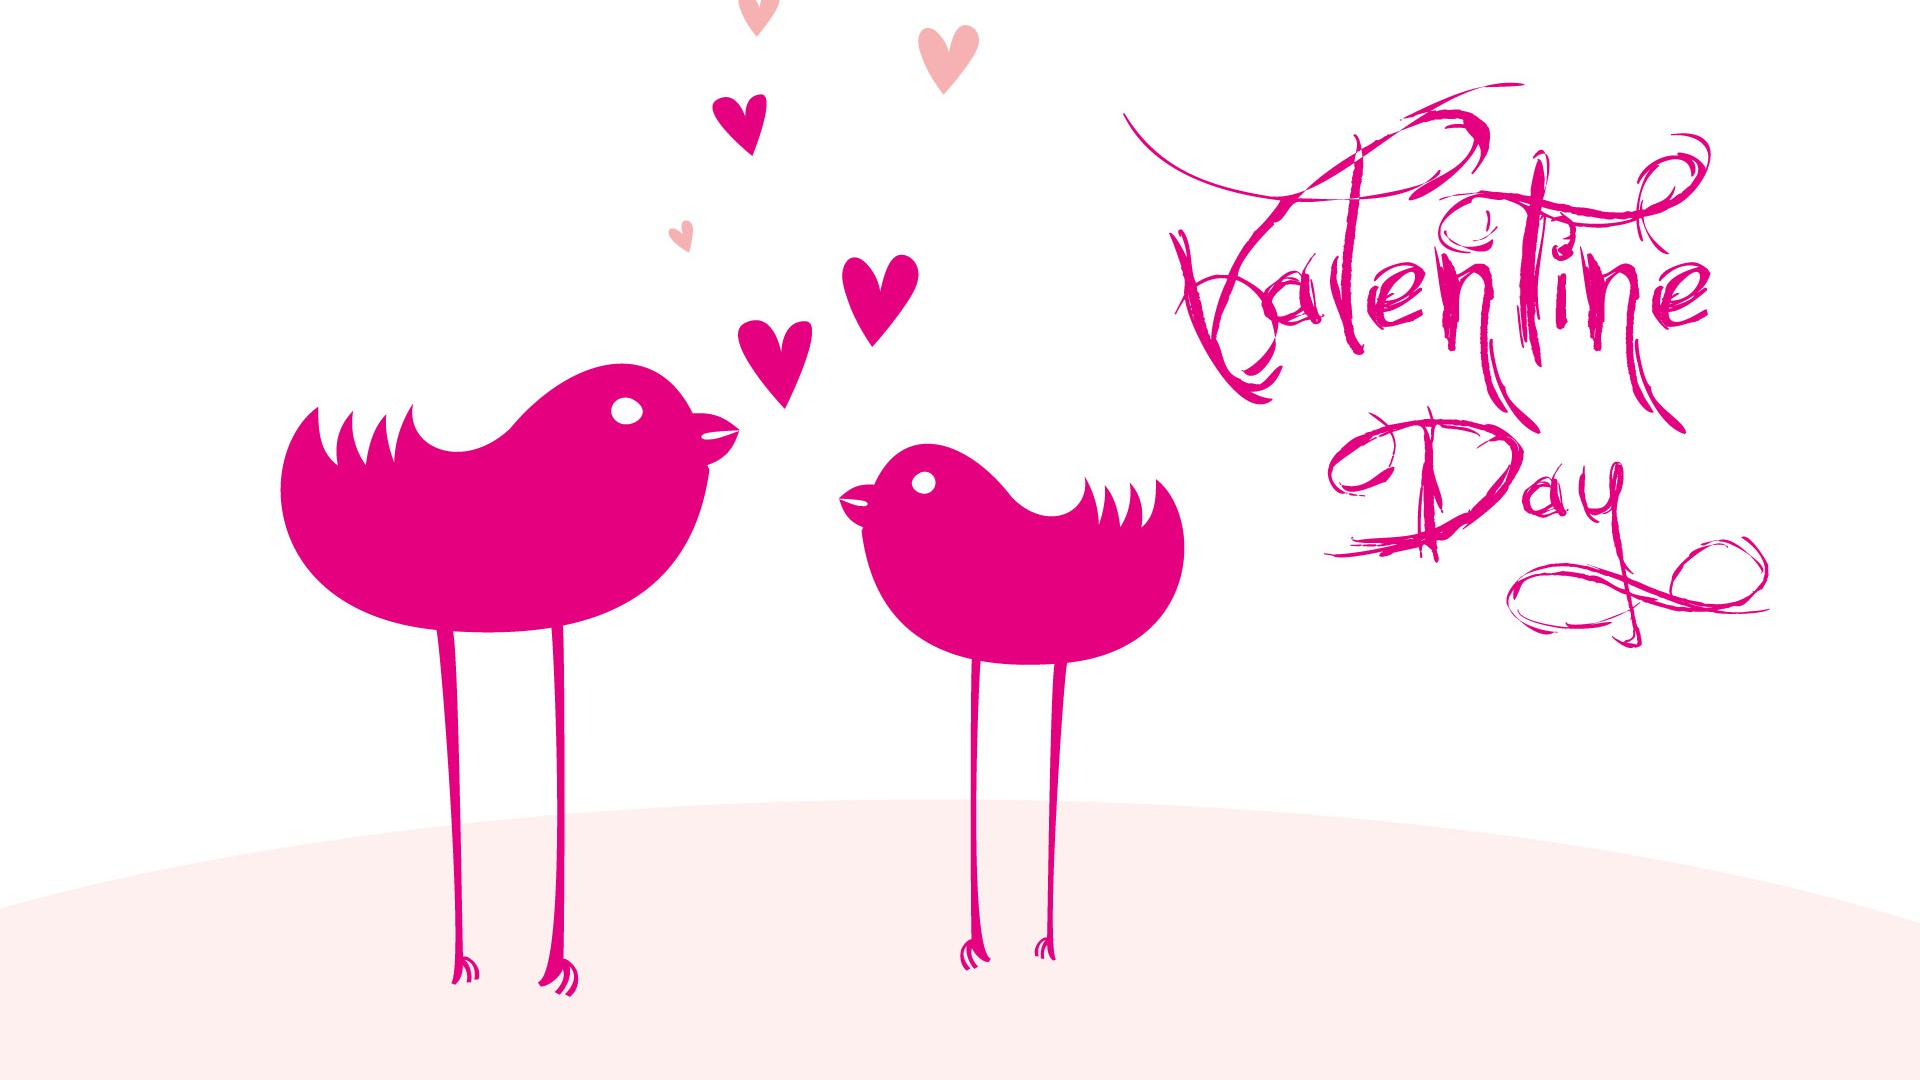 Valentine's Day Love Theme Wallpapers #37 - 1920x1080